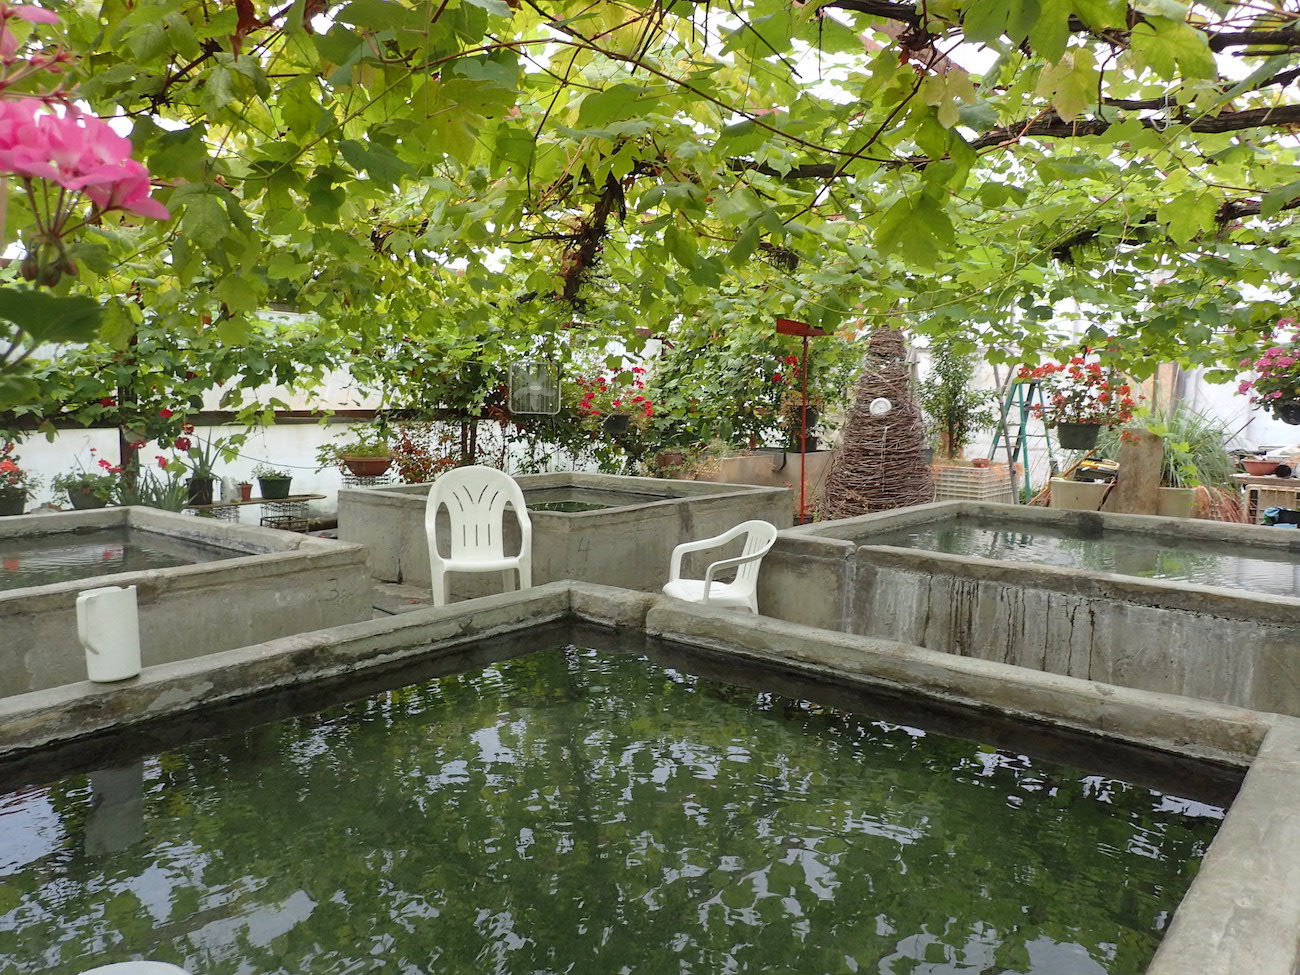 Water fills concrete pools below vines growing on a greenhouse ceiling.